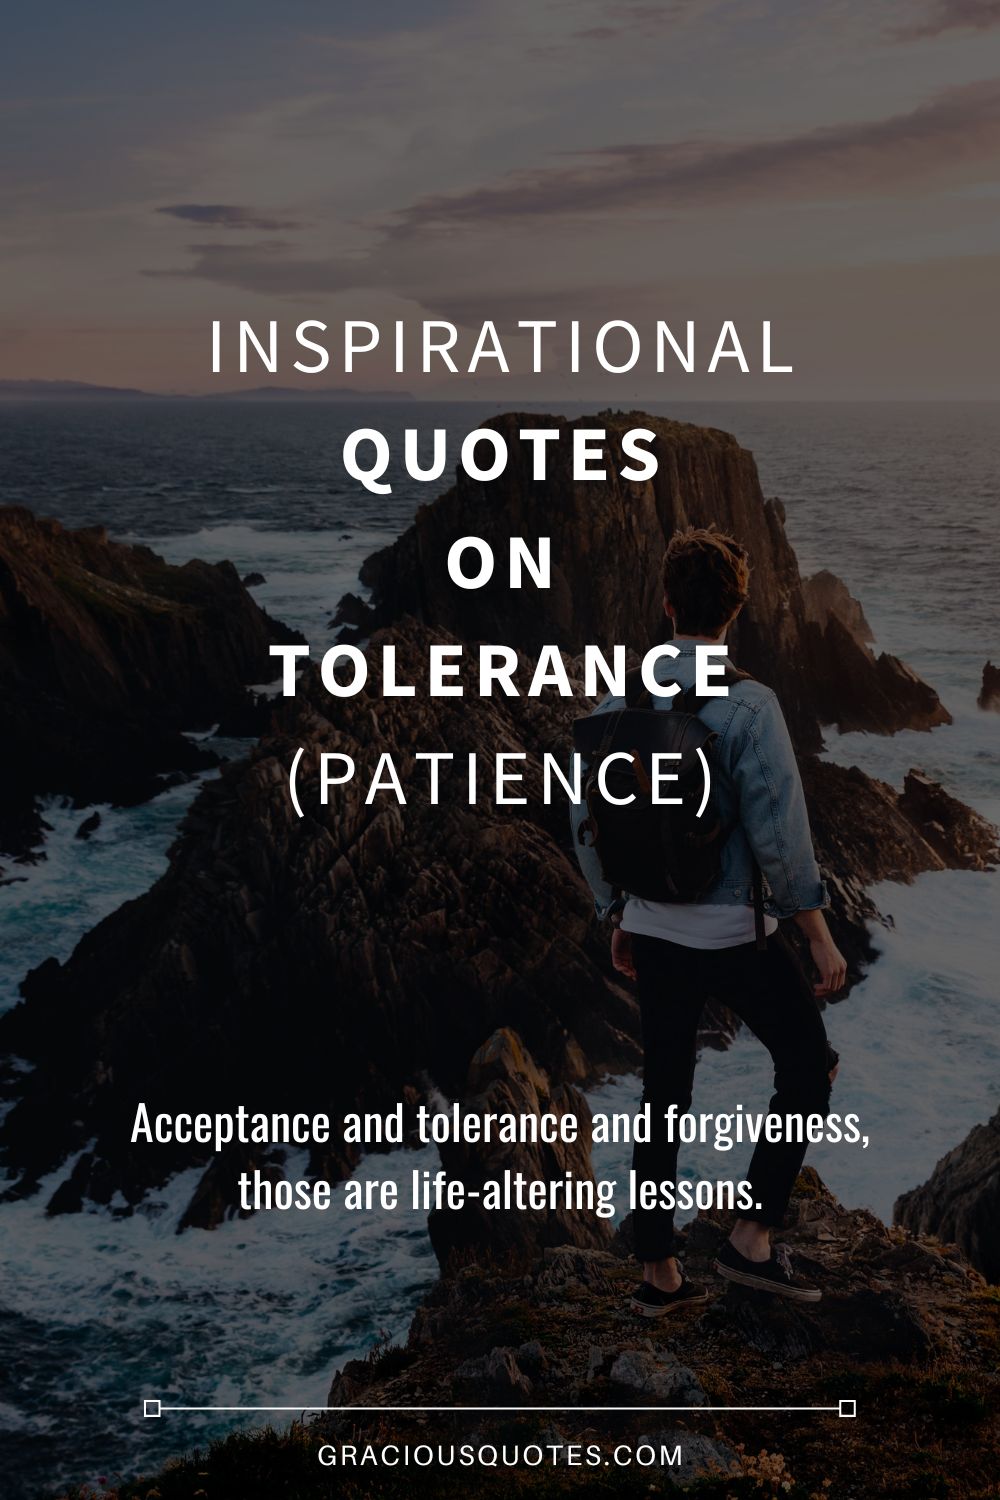 Inspirational Quotes on Tolerance (PATIENCE) - Gracious Quotes